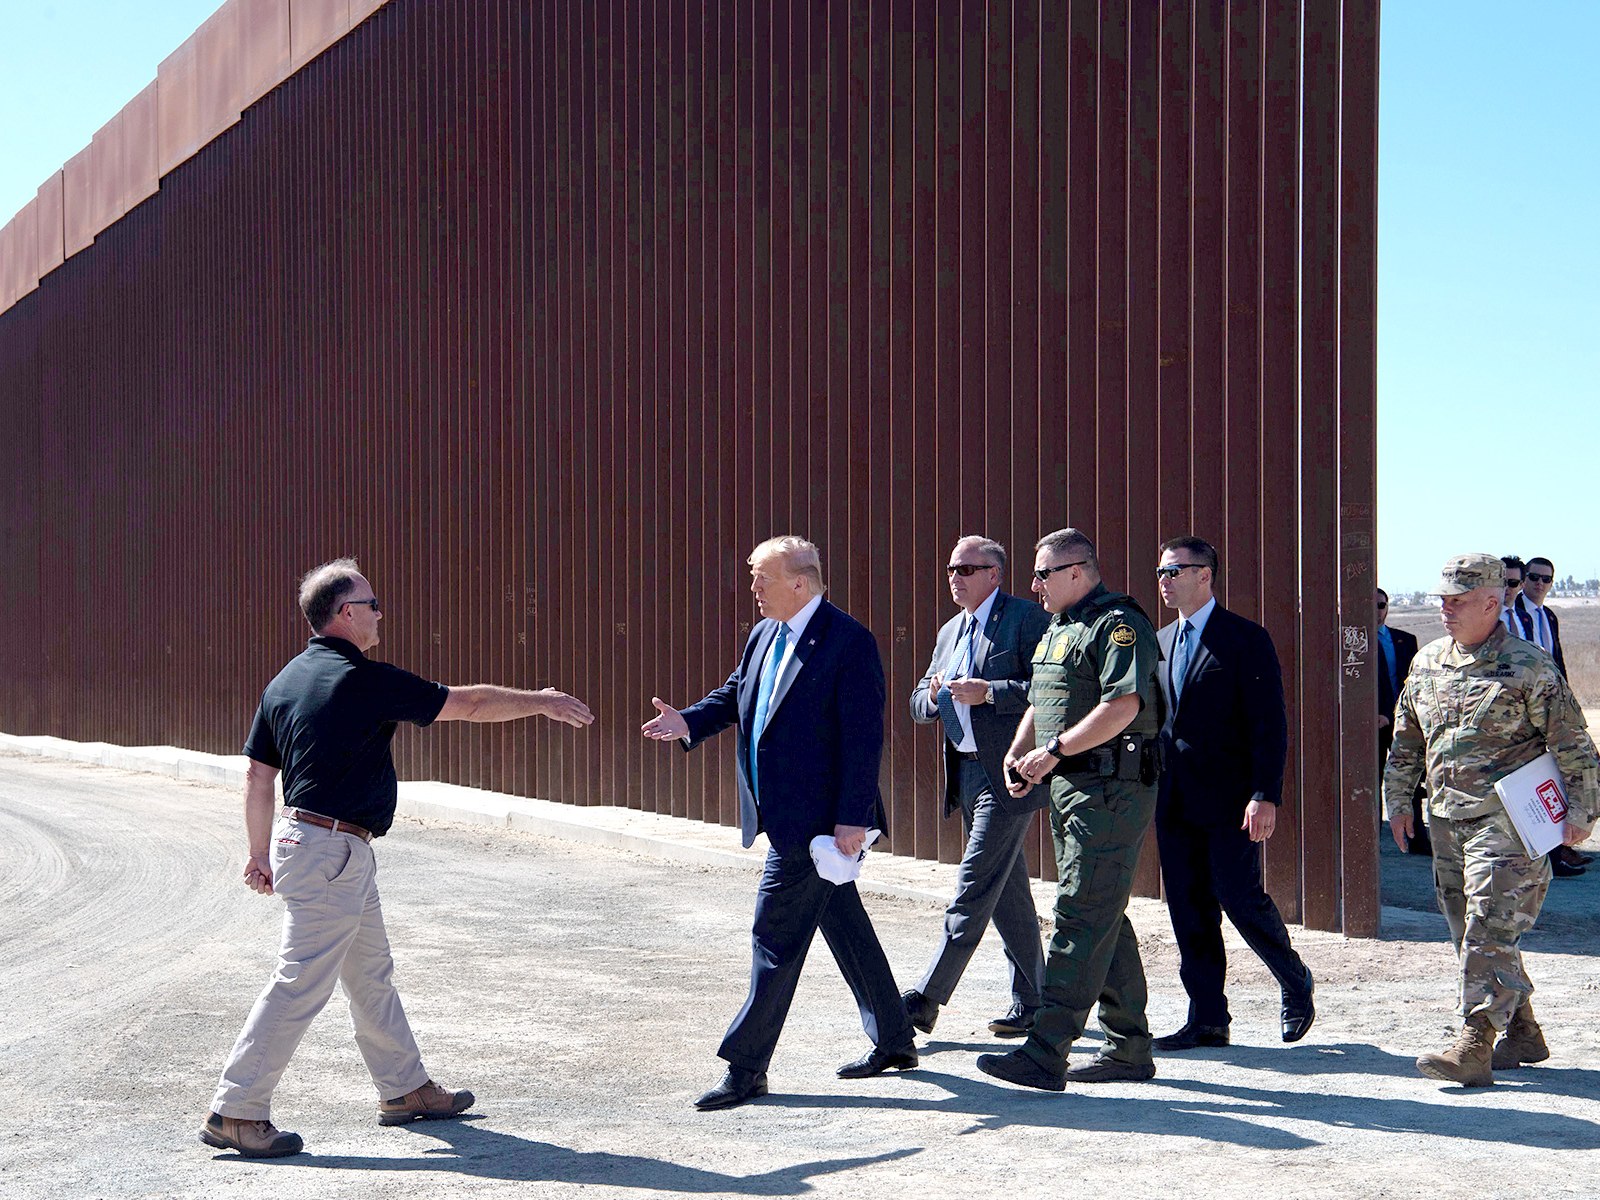 Trump wanted to put cattle on ladders over border wall, ex aide reveals (independent.co.uk)